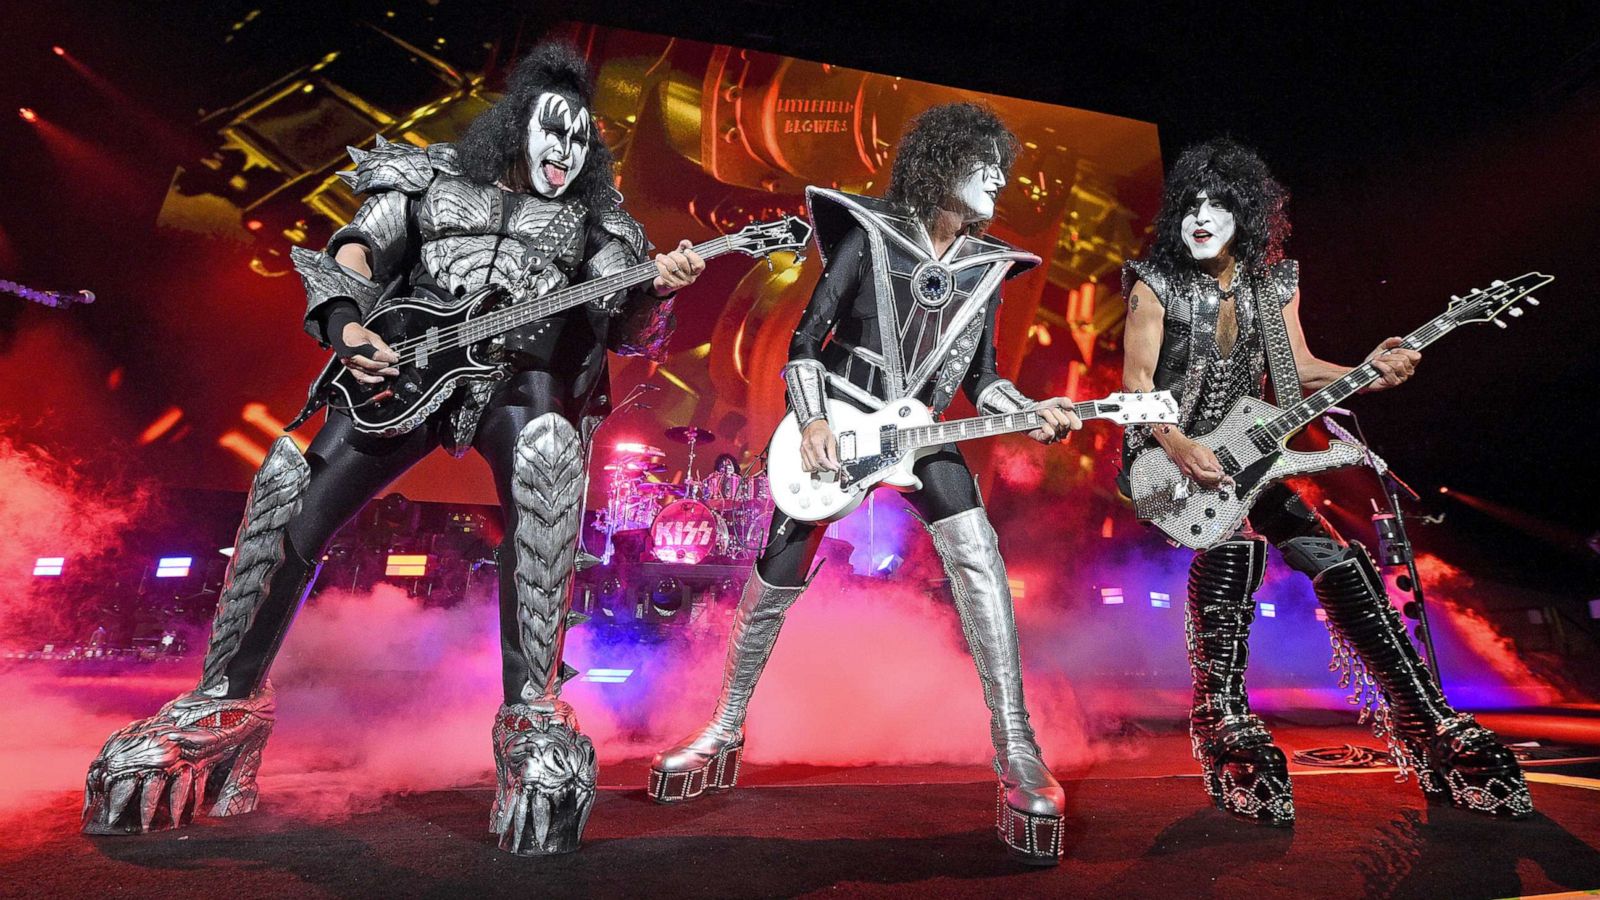 PHOTO: From left, Gene Simmons, Tommy Thayer, and Paul Stanley of KISS perform at Battery Park on June 11, 2021, in New York City.